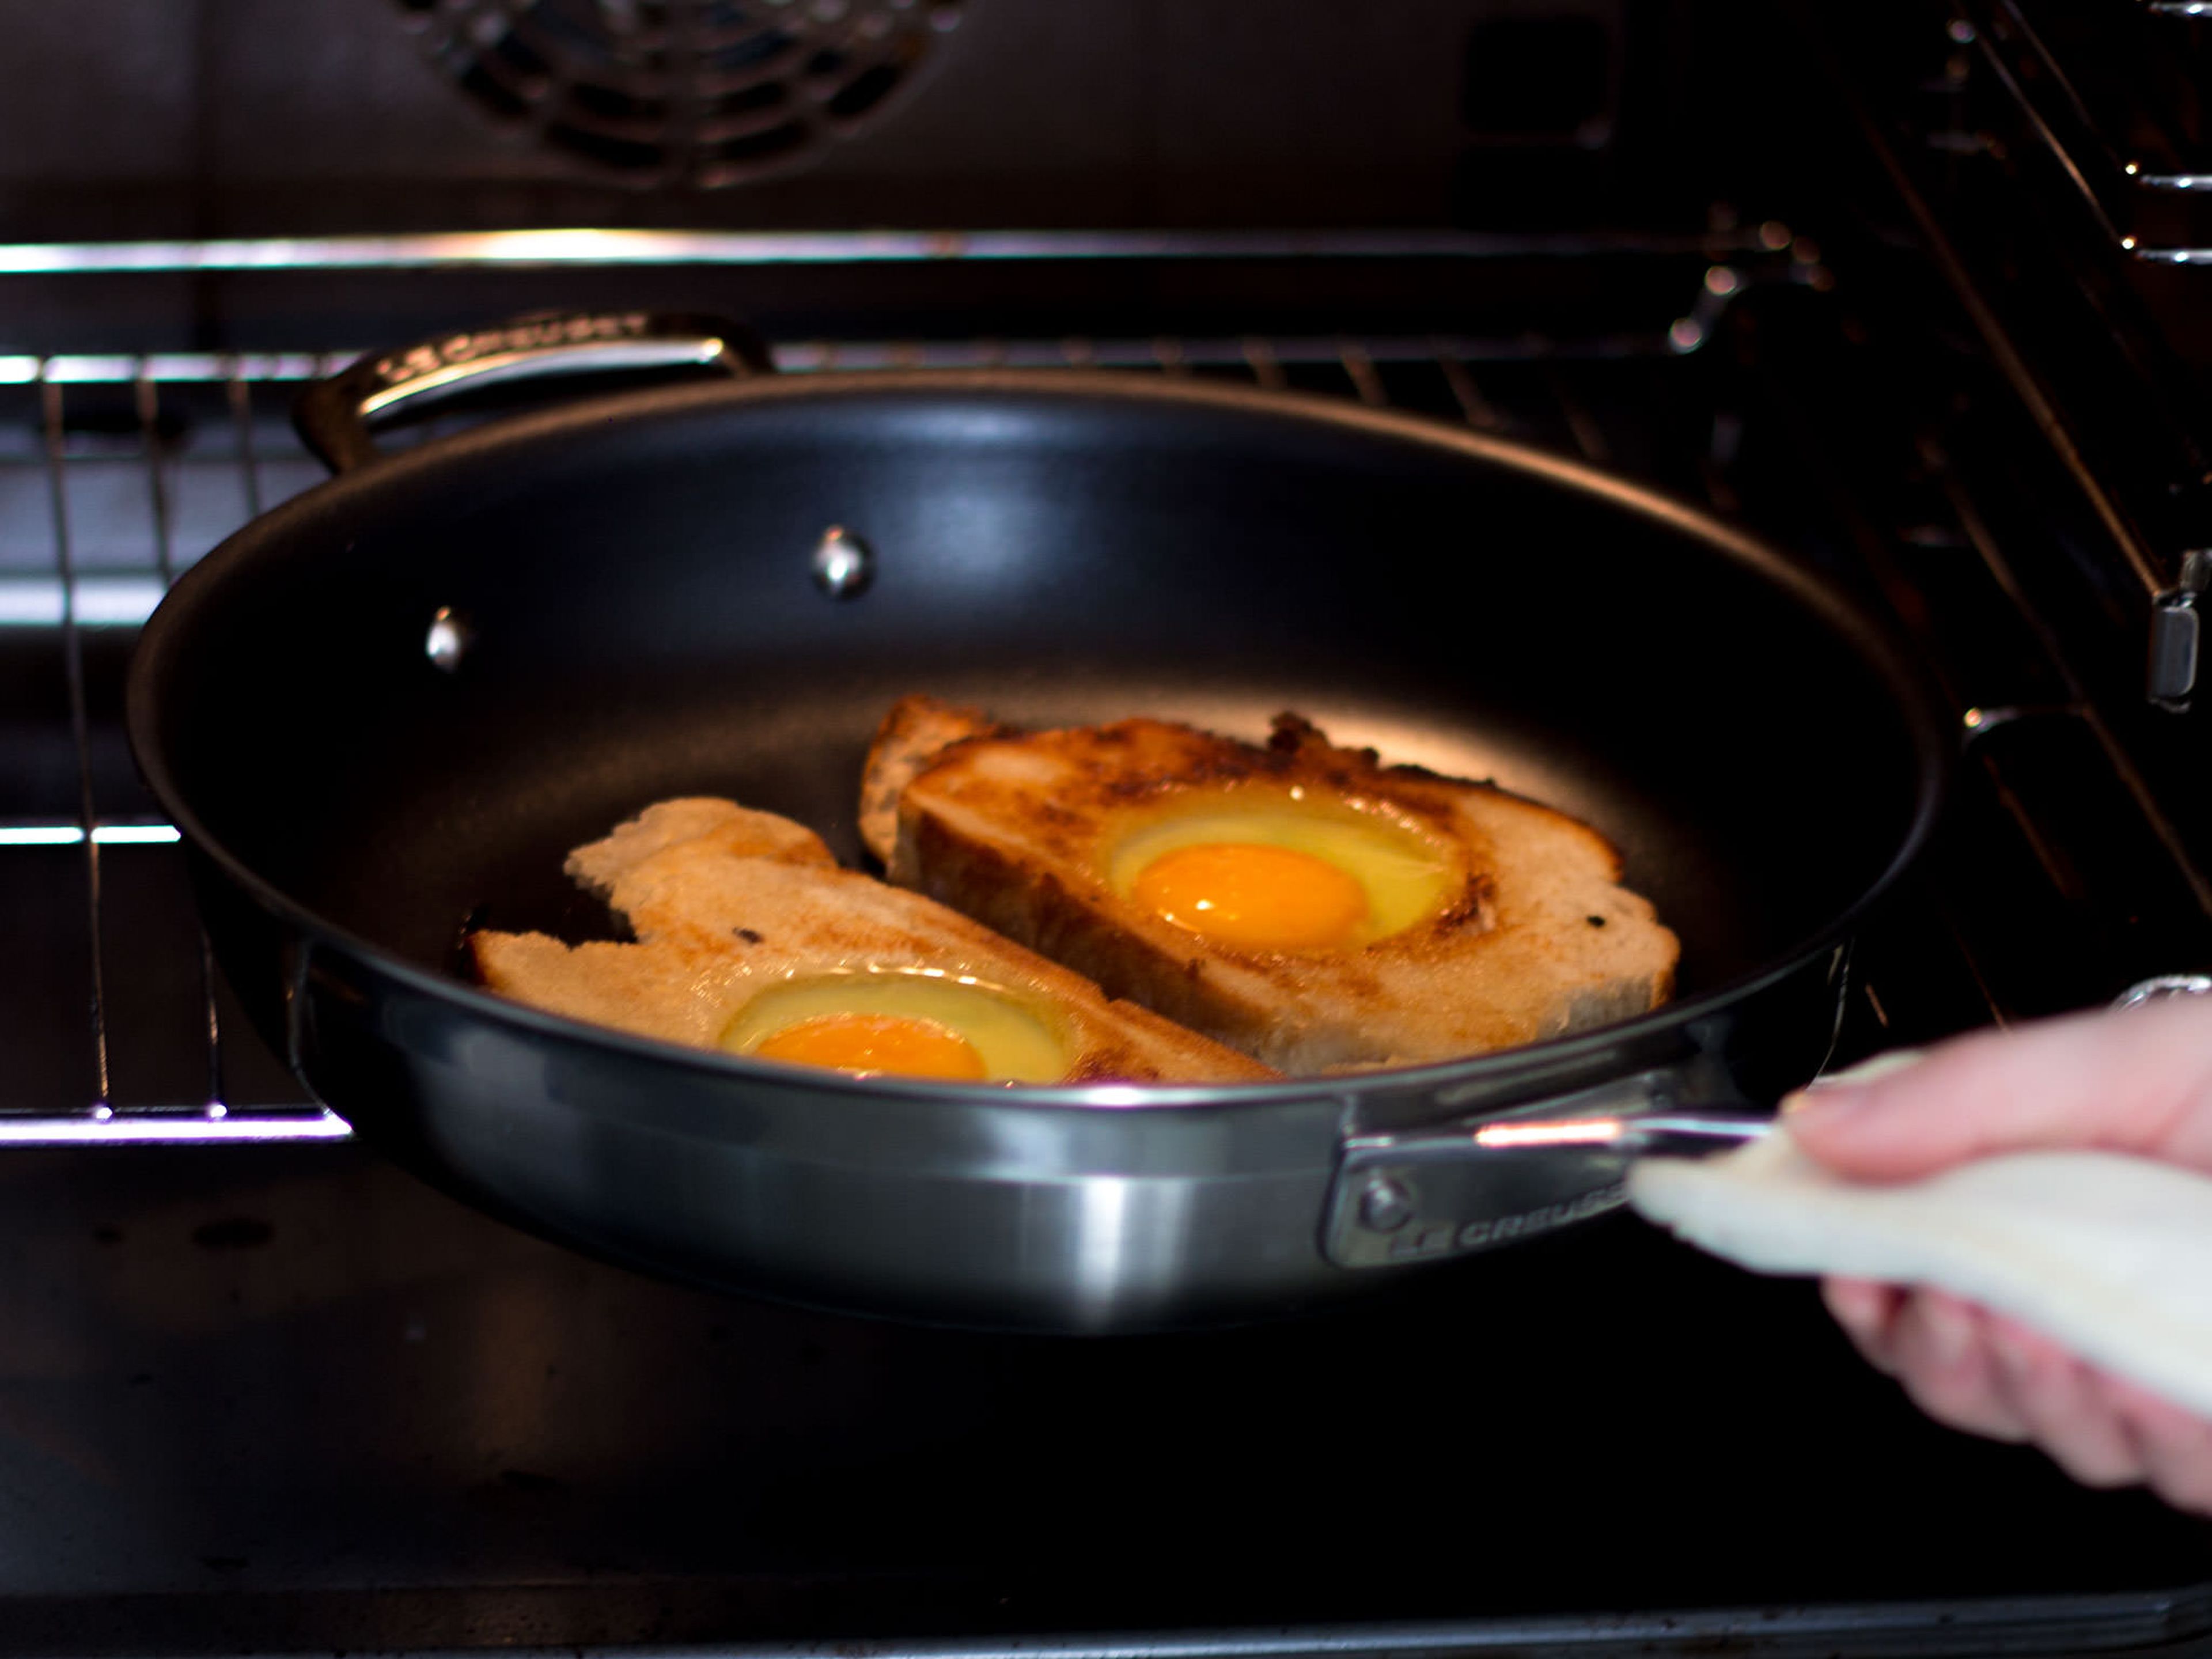 In a large ovenproof frying pan, toast bread in some butter over medium heat for approx. 1 – 2 min. per side. When lightly toasted on both sides, crack an egg into the center of each piece of bread and transfer pan to preheated oven and bake at 160°C/320°F for 3 – 5 min. until egg white and yolk are slightly firm. Season to taste with salt and pepper. Serve with radish and cream dip. Garnish with garden cress. Enjoy!